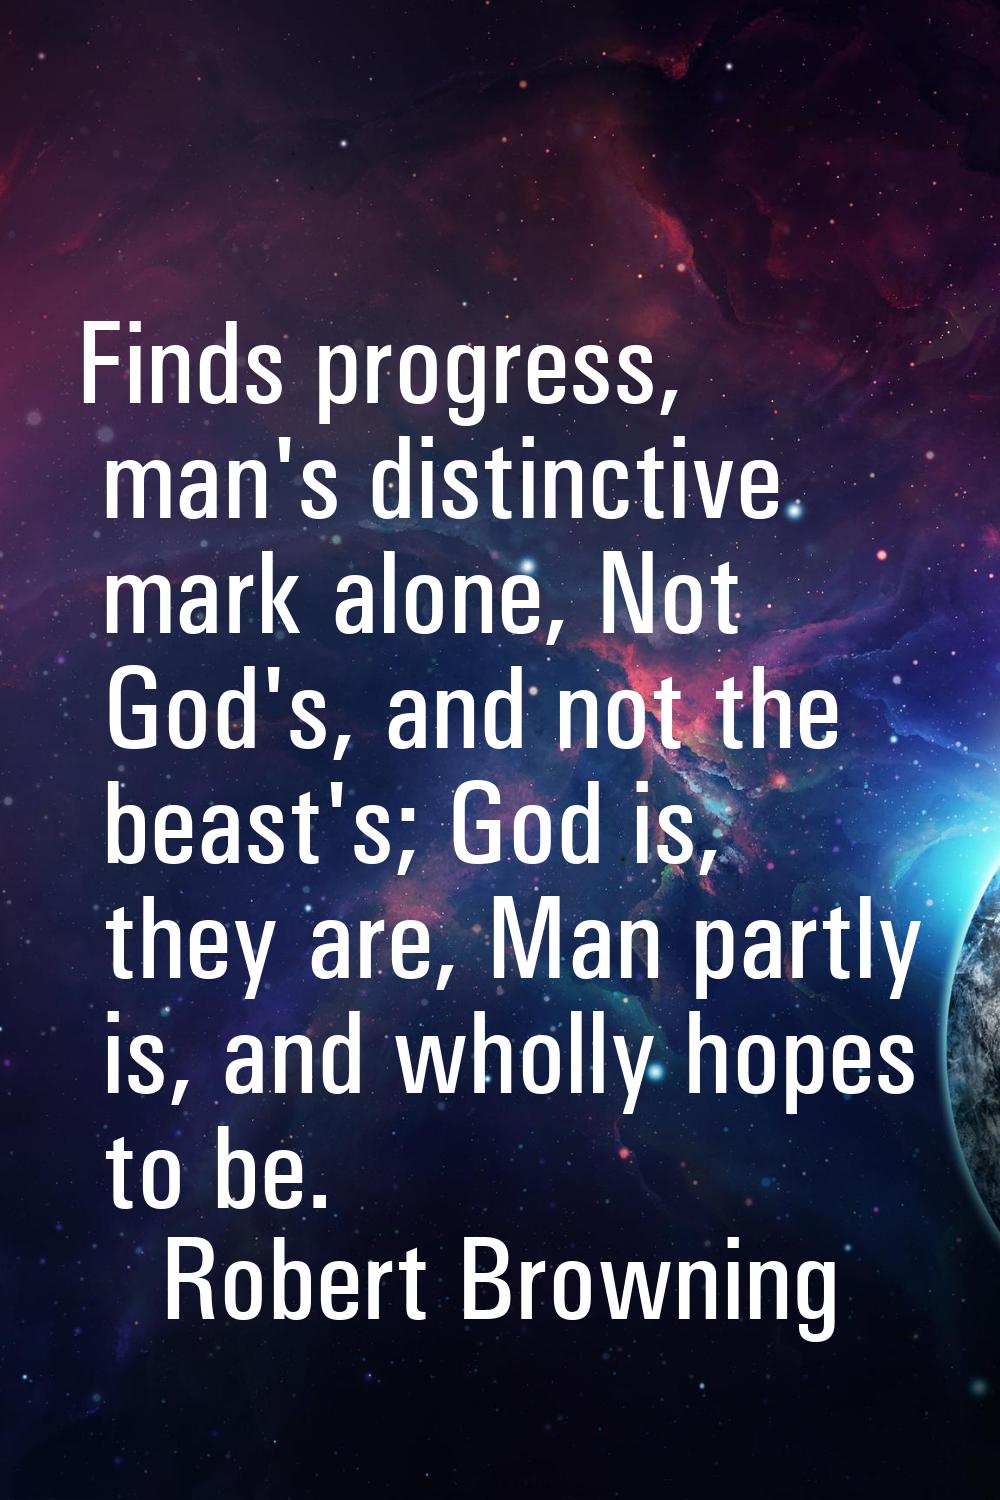 Finds progress, man's distinctive mark alone, Not God's, and not the beast's; God is, they are, Man